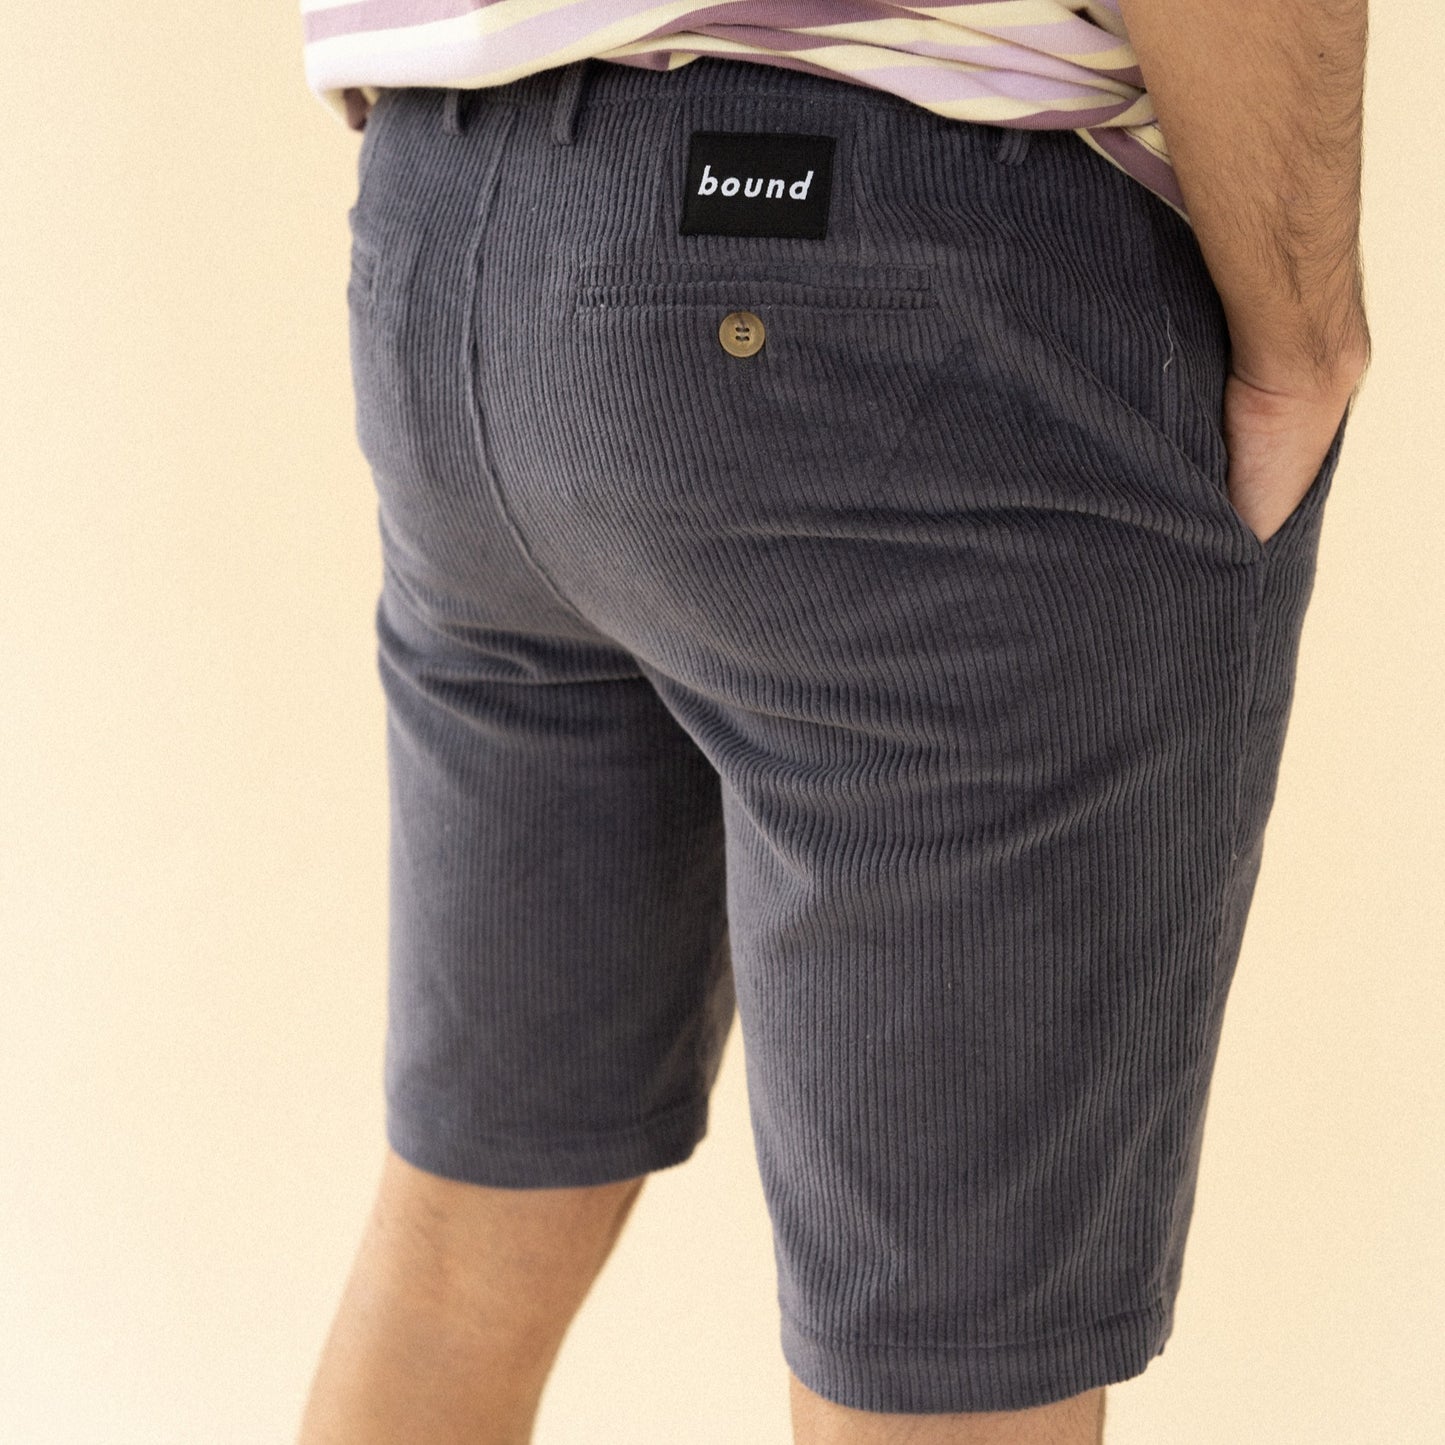 bound 'Charcoal' Cord Shorts